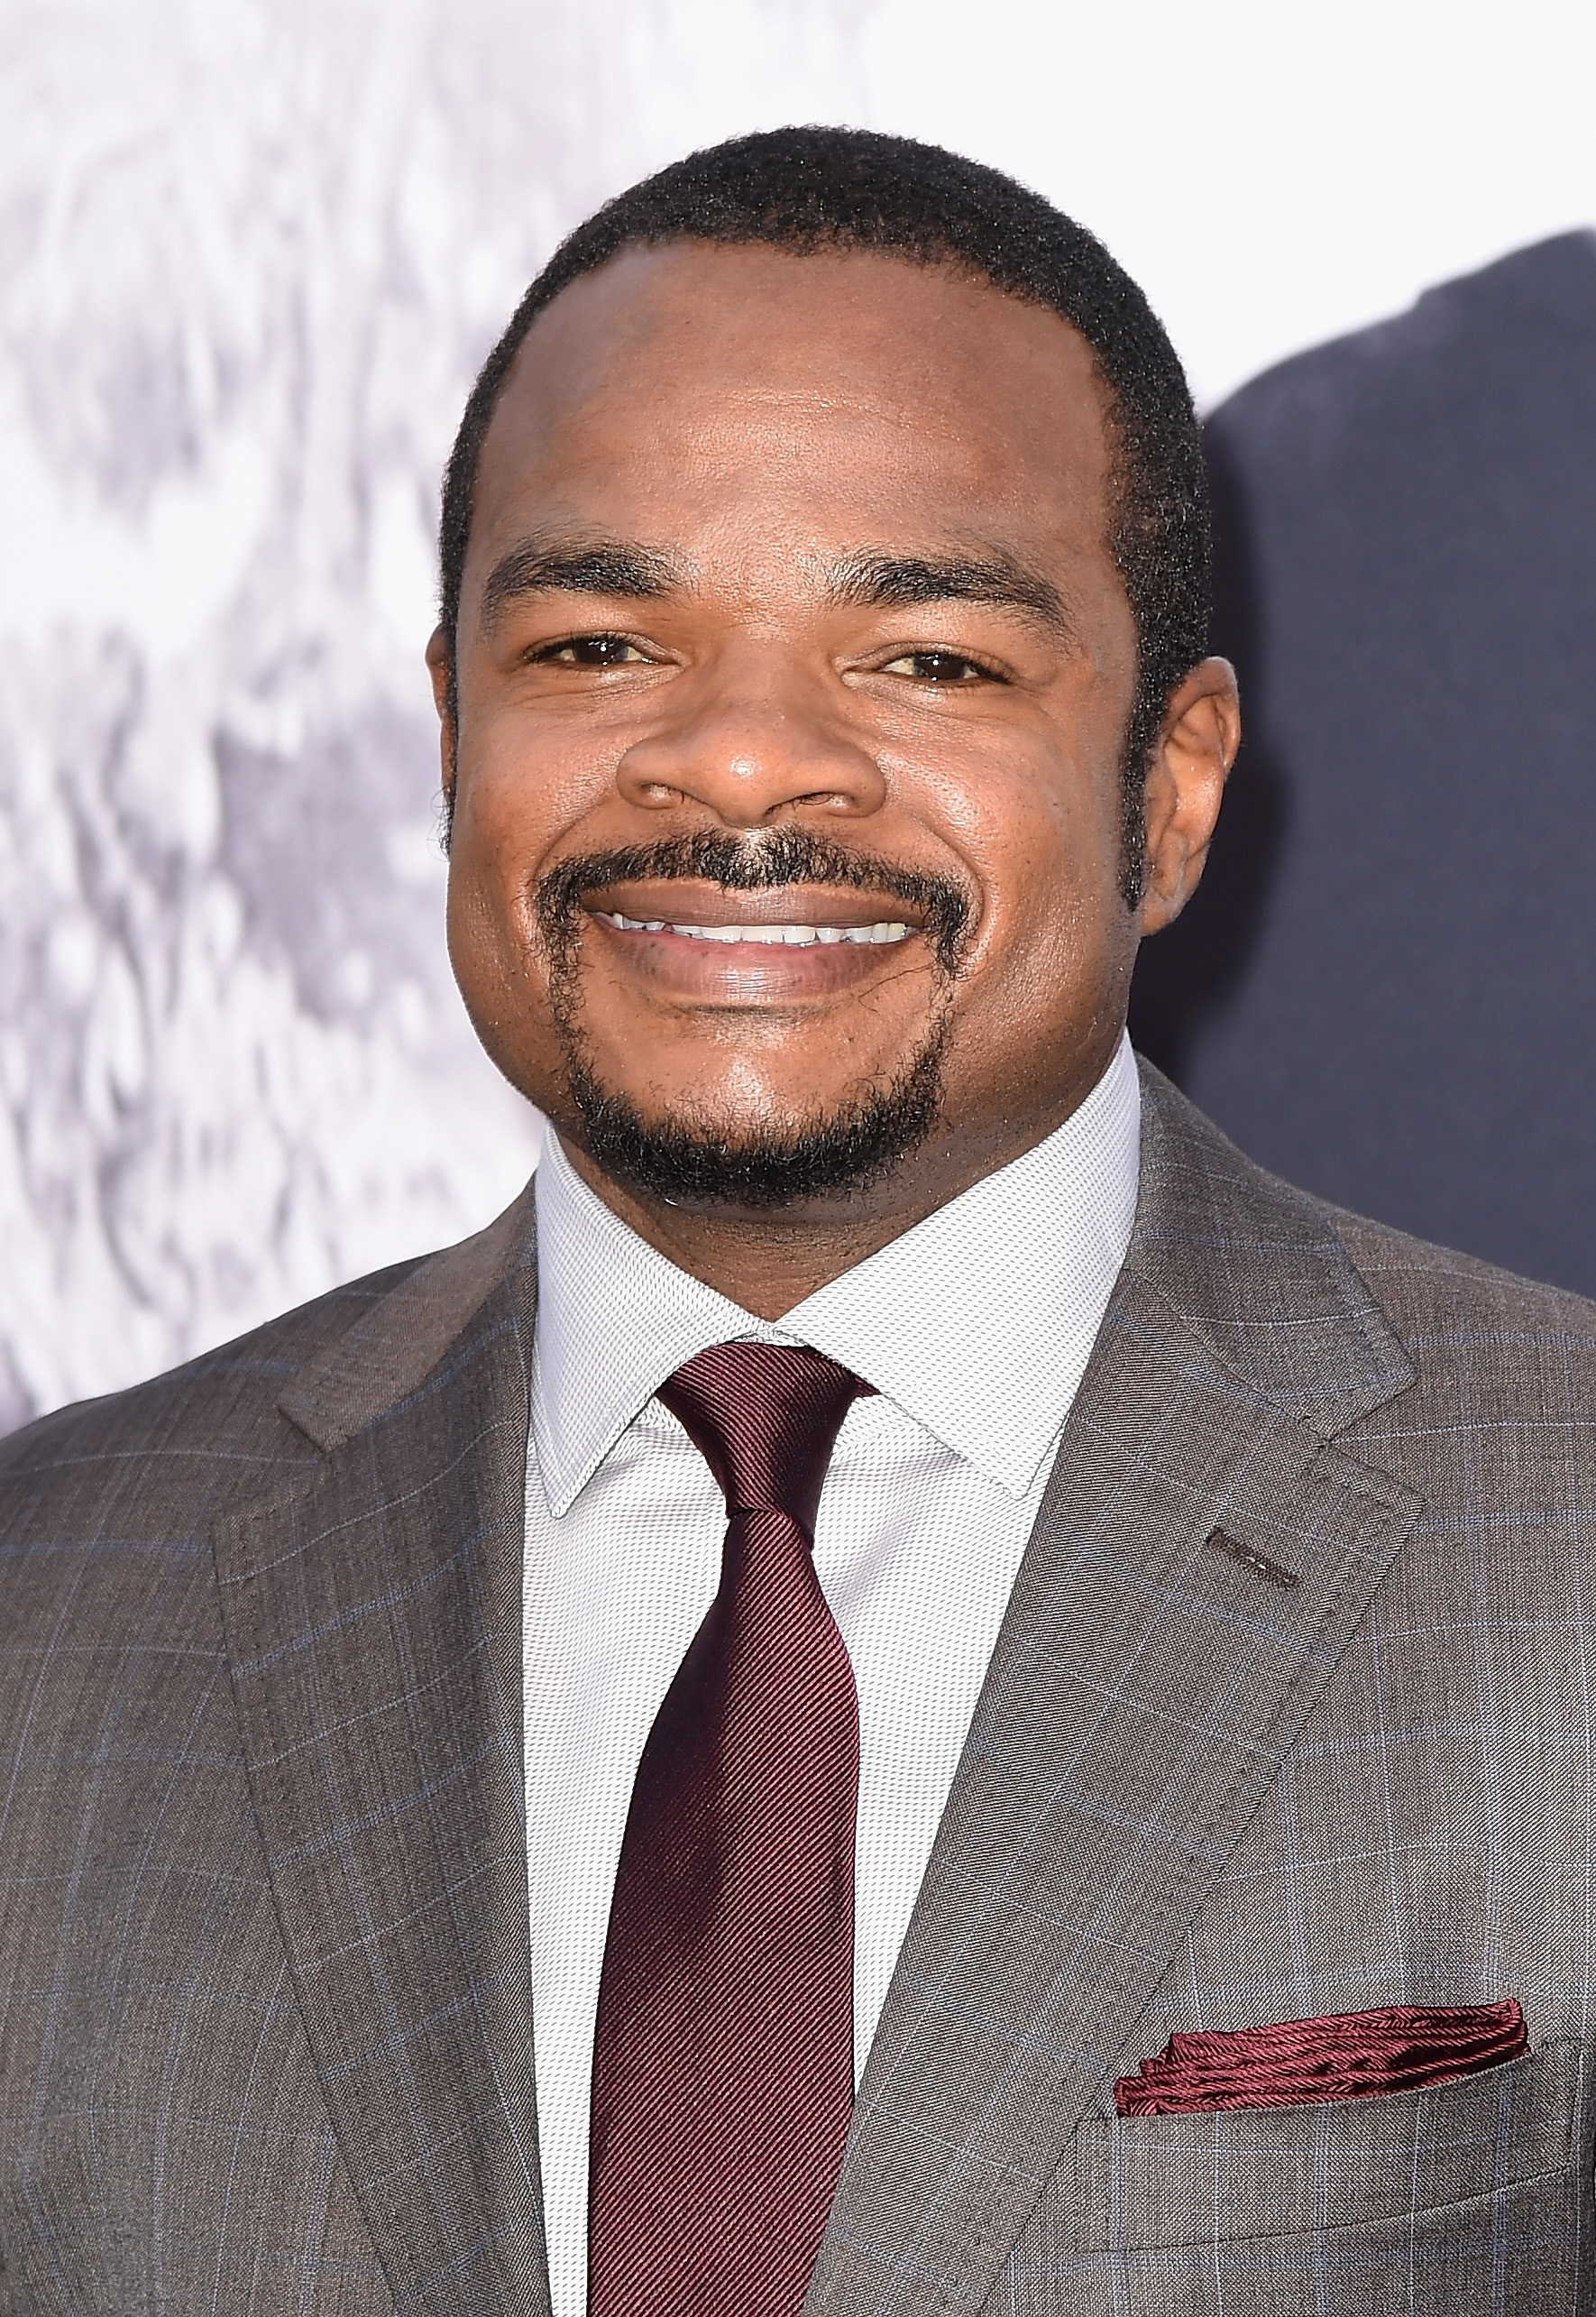 F. Gary Gray at the premiere of "Straight Outta Compton" in Los Angeles on Aug. 10, 2015.